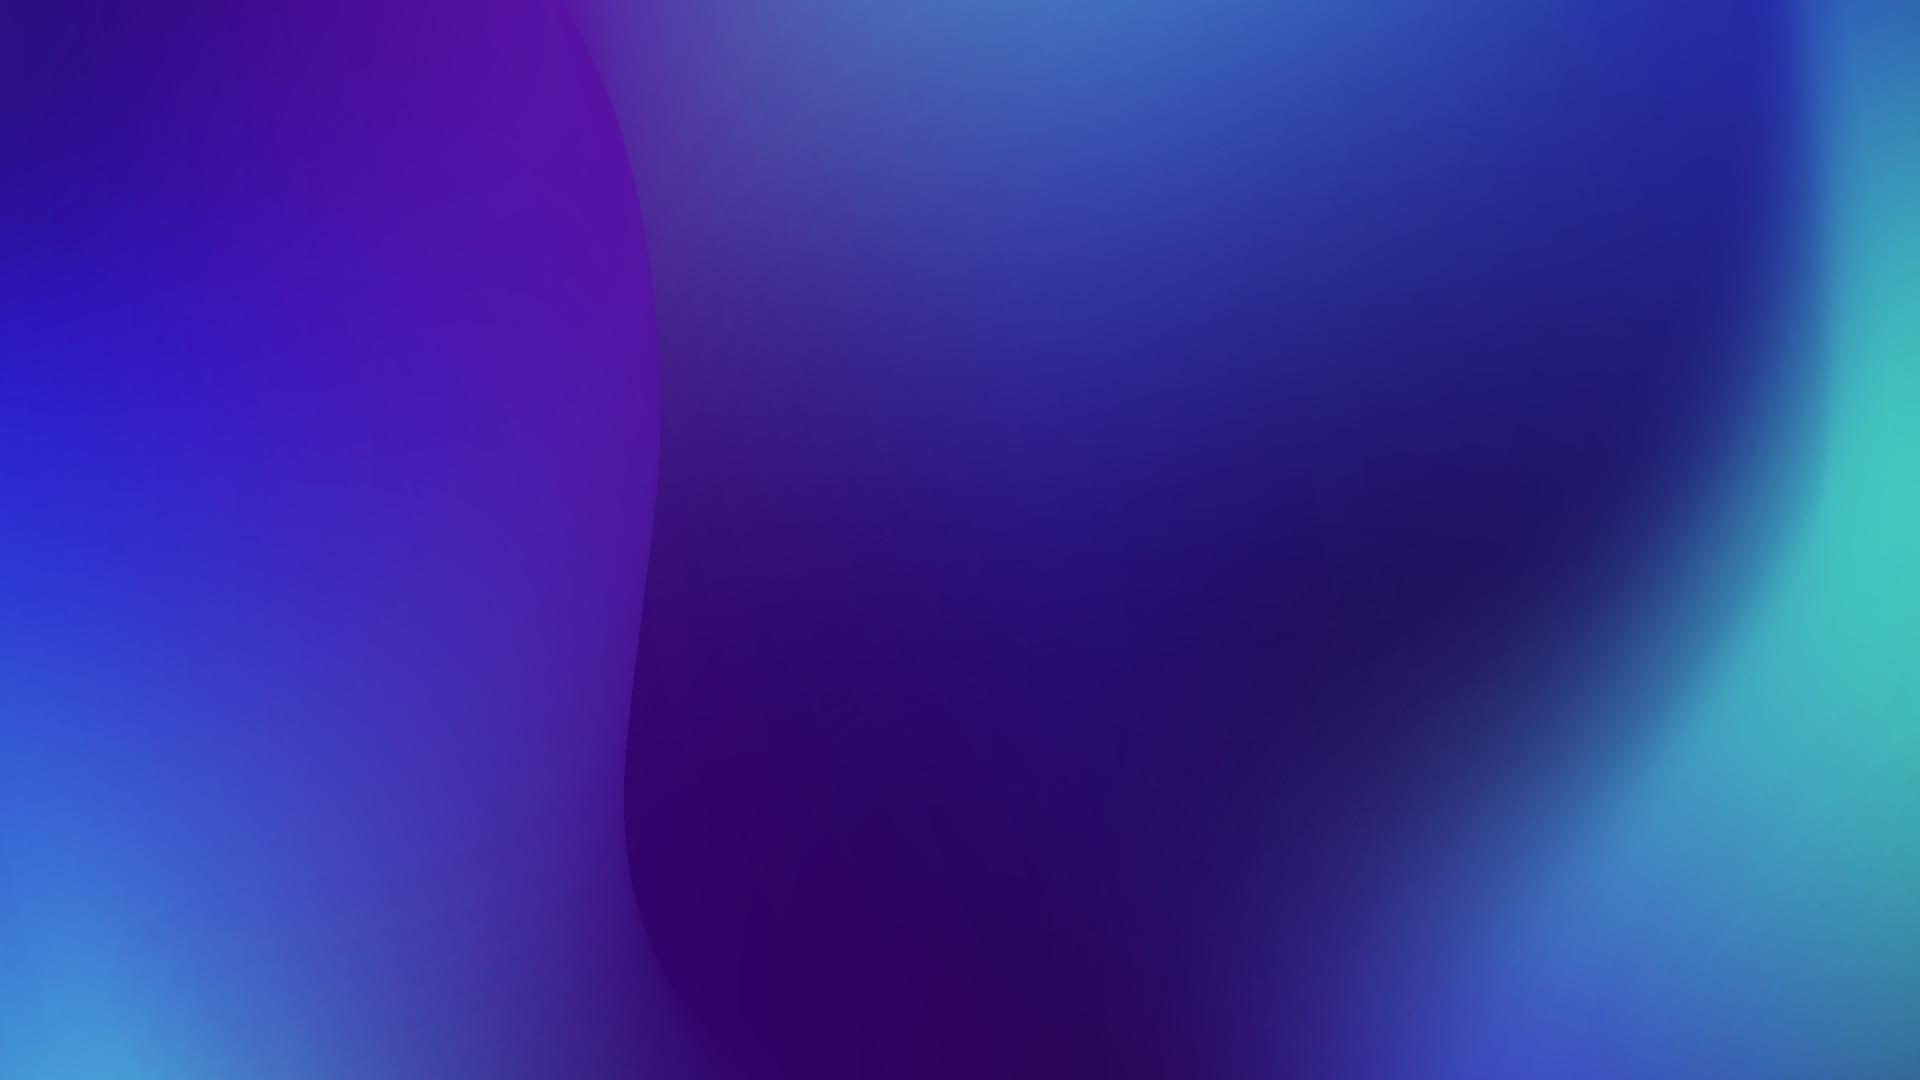 Atmosphere, Purple, Violet, Gas, Electric Blue. Wallpaper in 1920x1080 Resolution